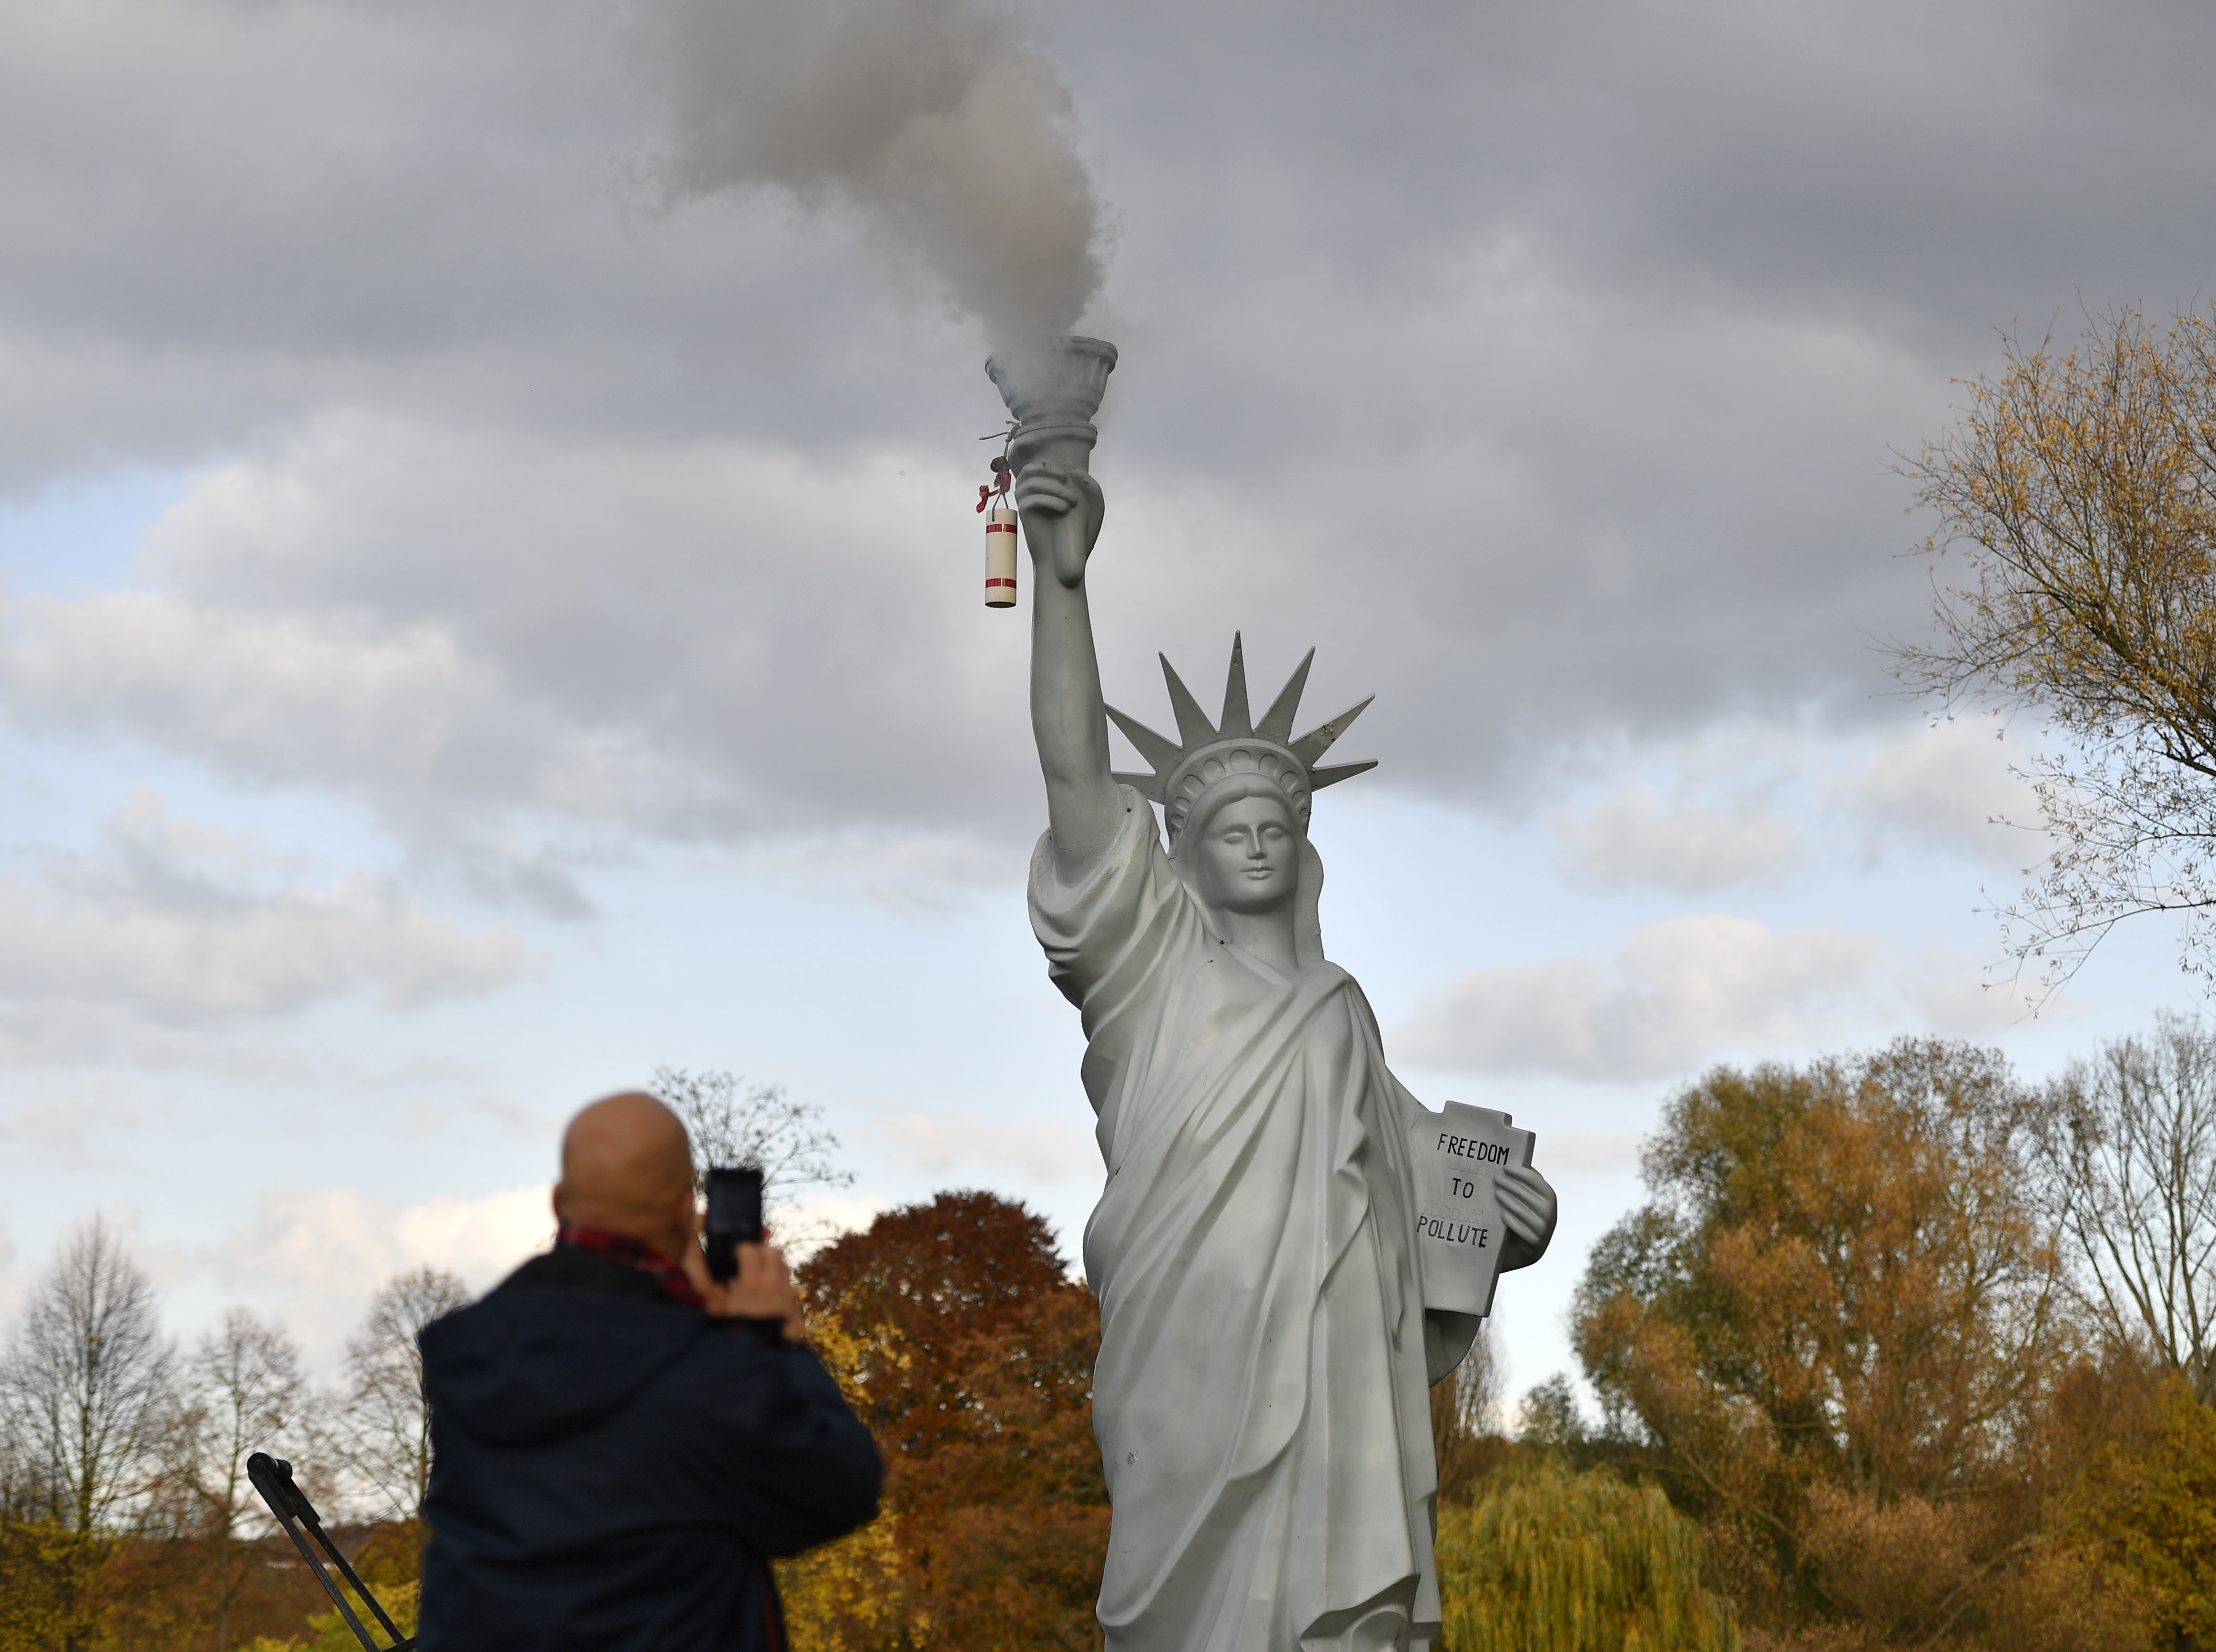 A man takes a picture of a replica of the Statue of Liberty by Danish artist Jens Galschiot, emitting smoke in a park outside the 23rd UN Conference of the Parties (COP) climate talks in Bonn, Germany, Friday, Nov. 17, 2017. (AP Photo/Martin Meissner)